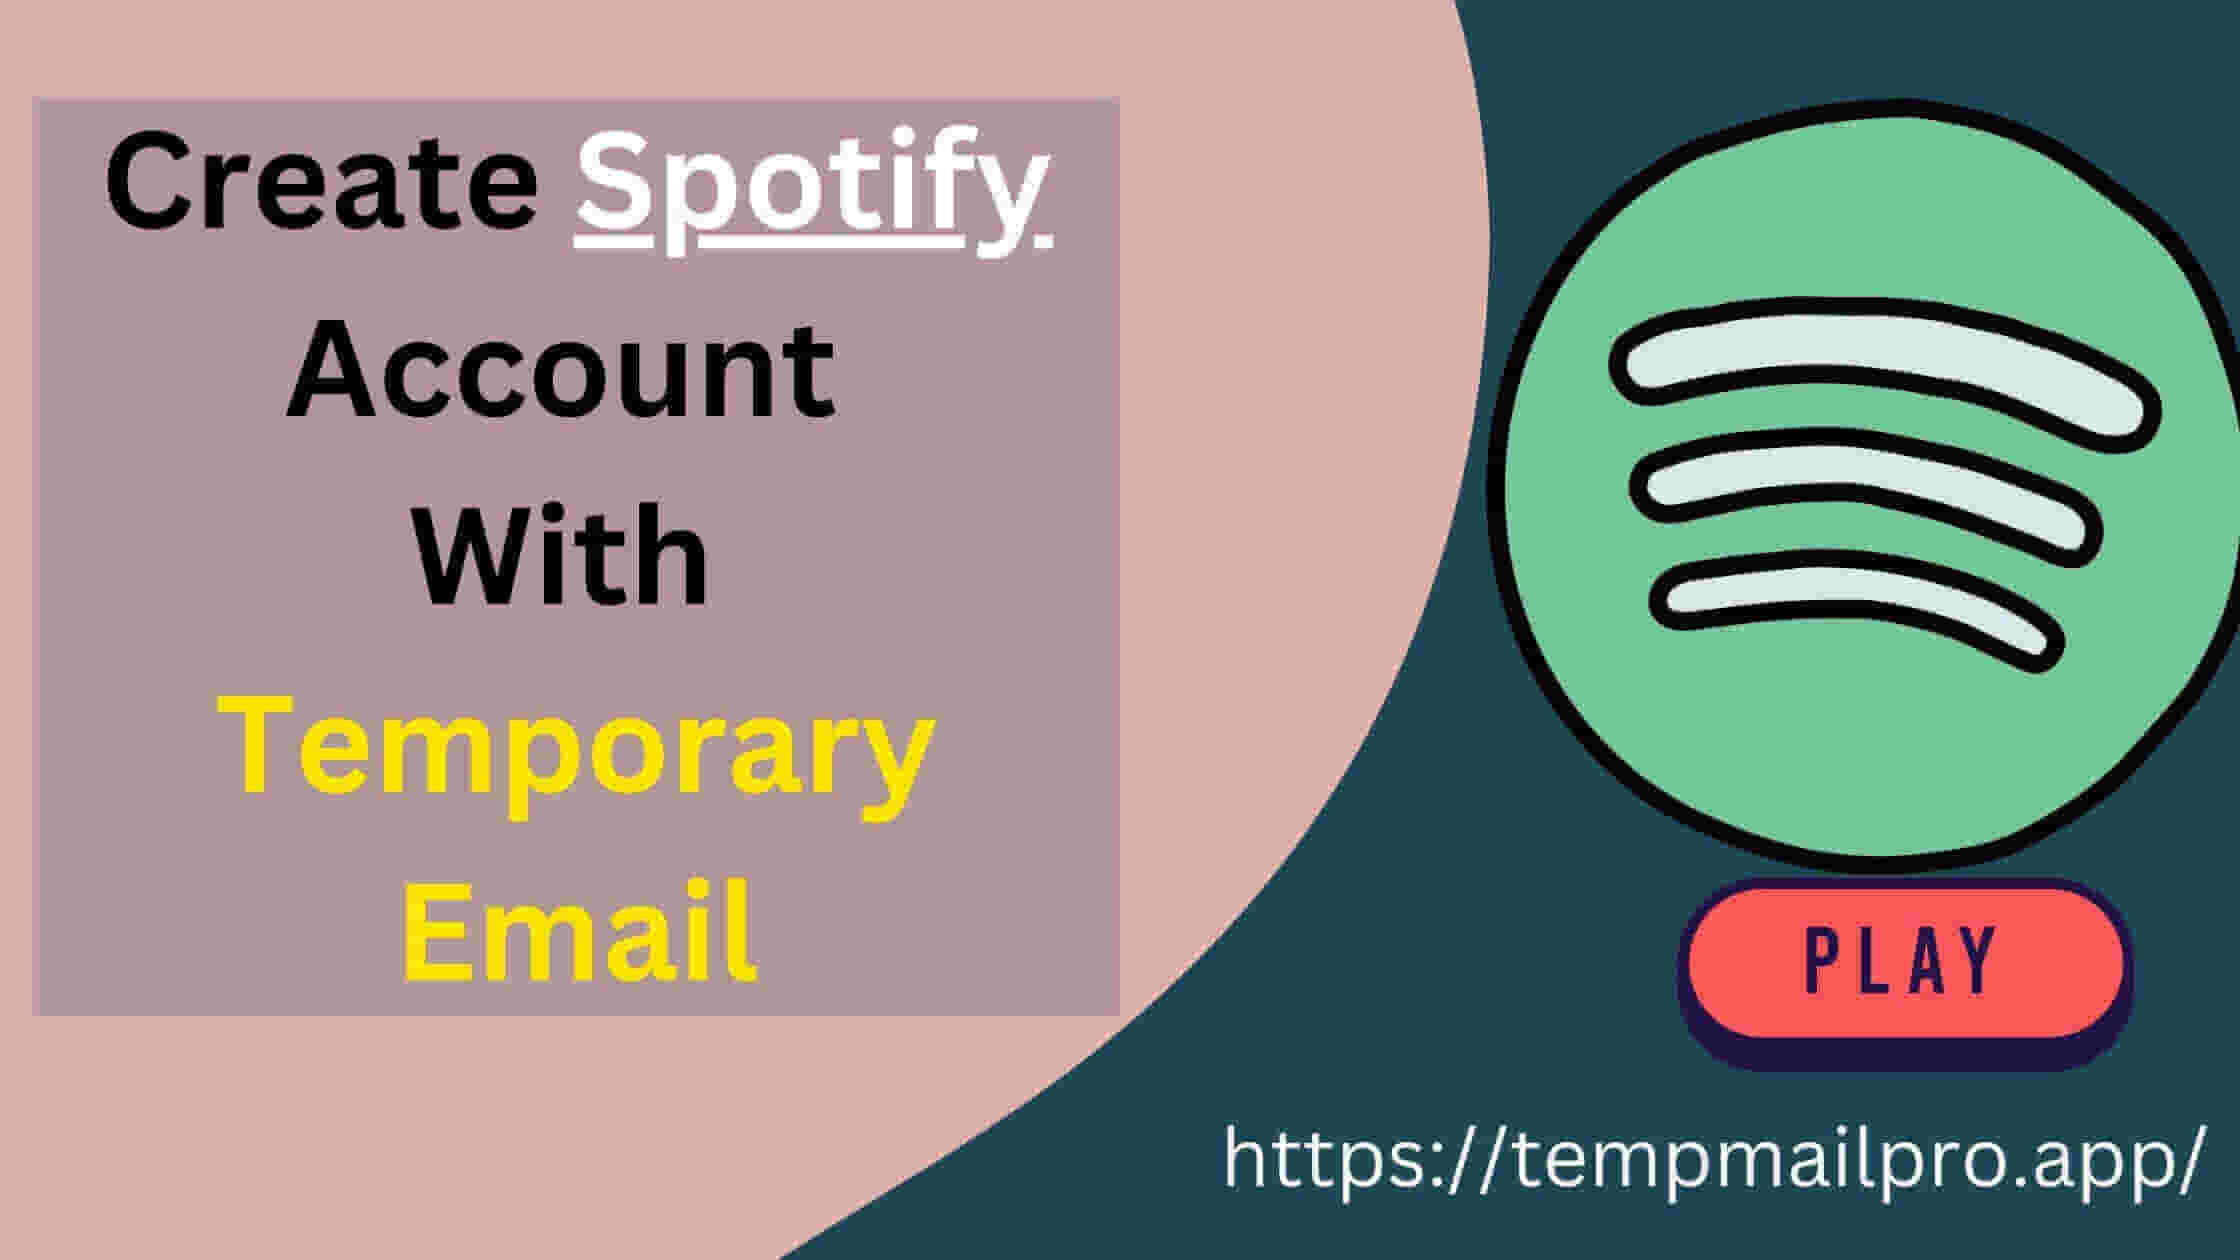 How To Create a Spotify Account With A Temporary Email? [2023]